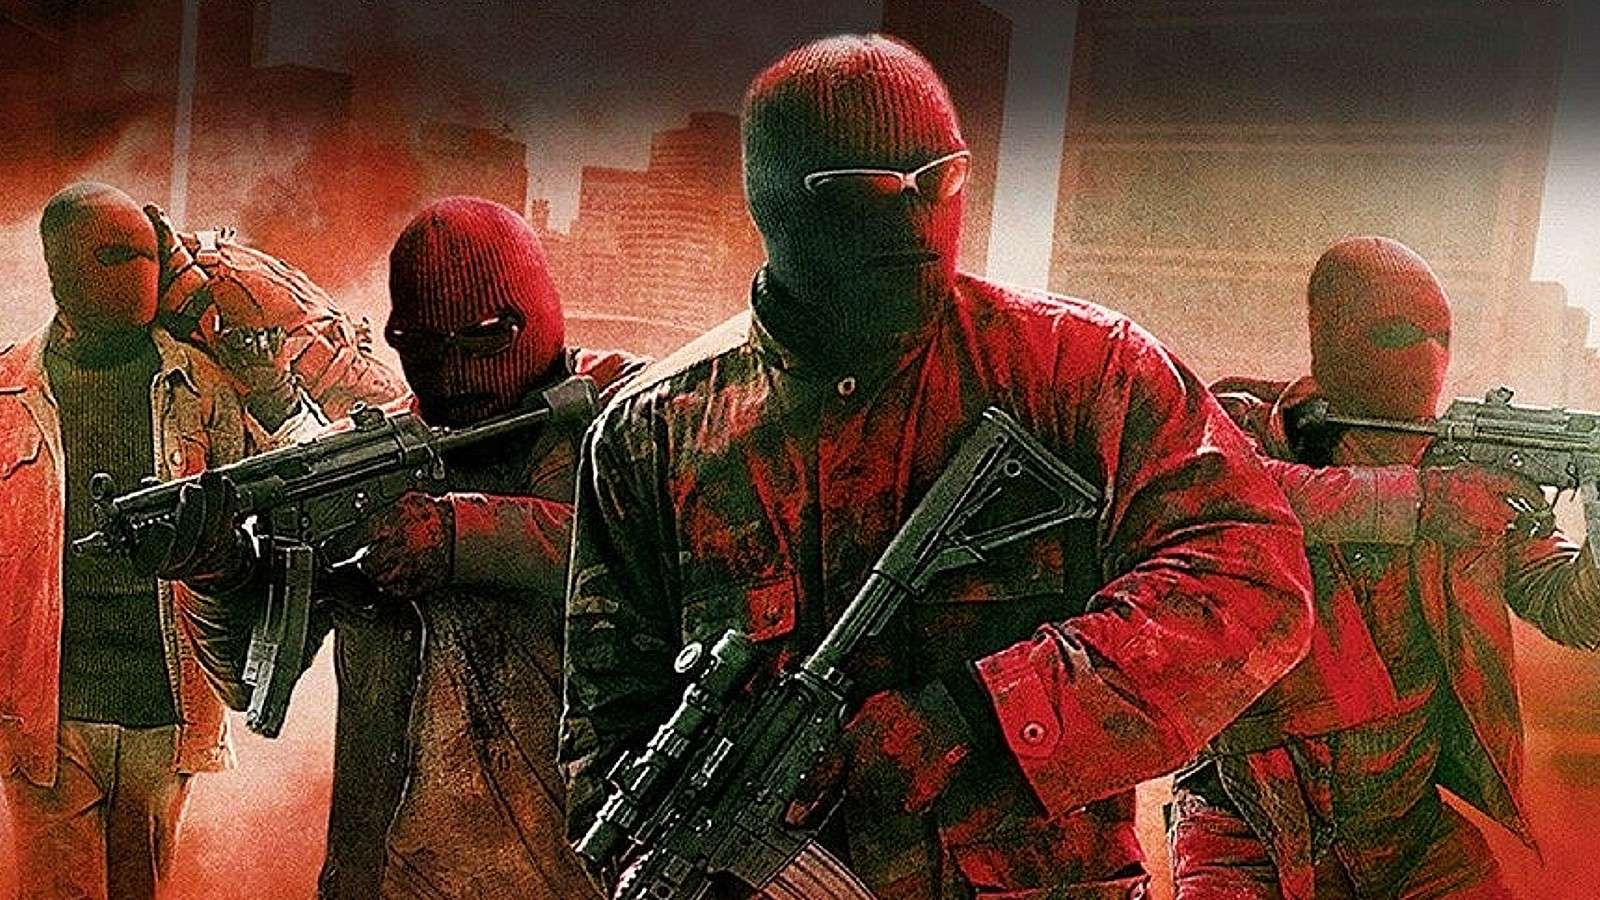 The poster for Triple 9